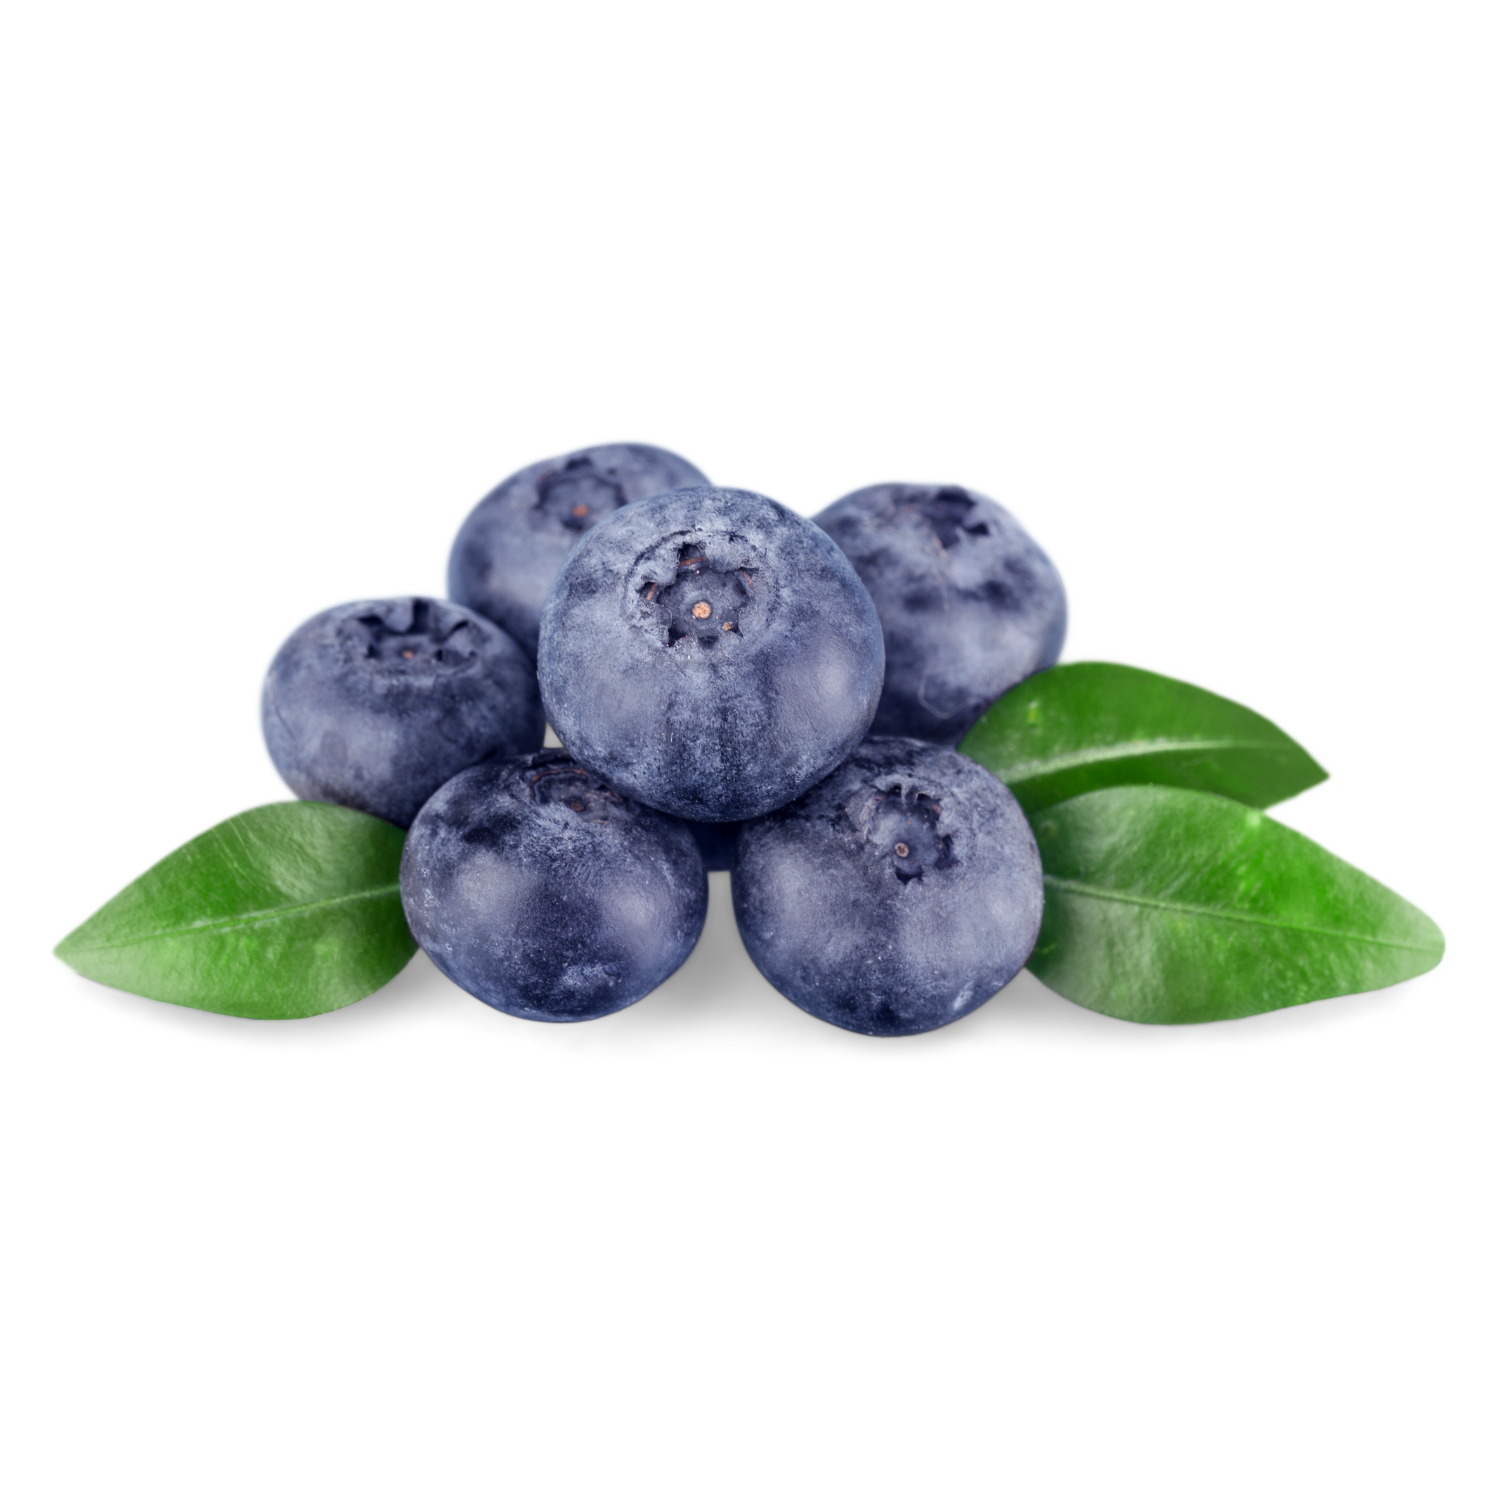 A group of fresh blueberries with green leaves on a white background.